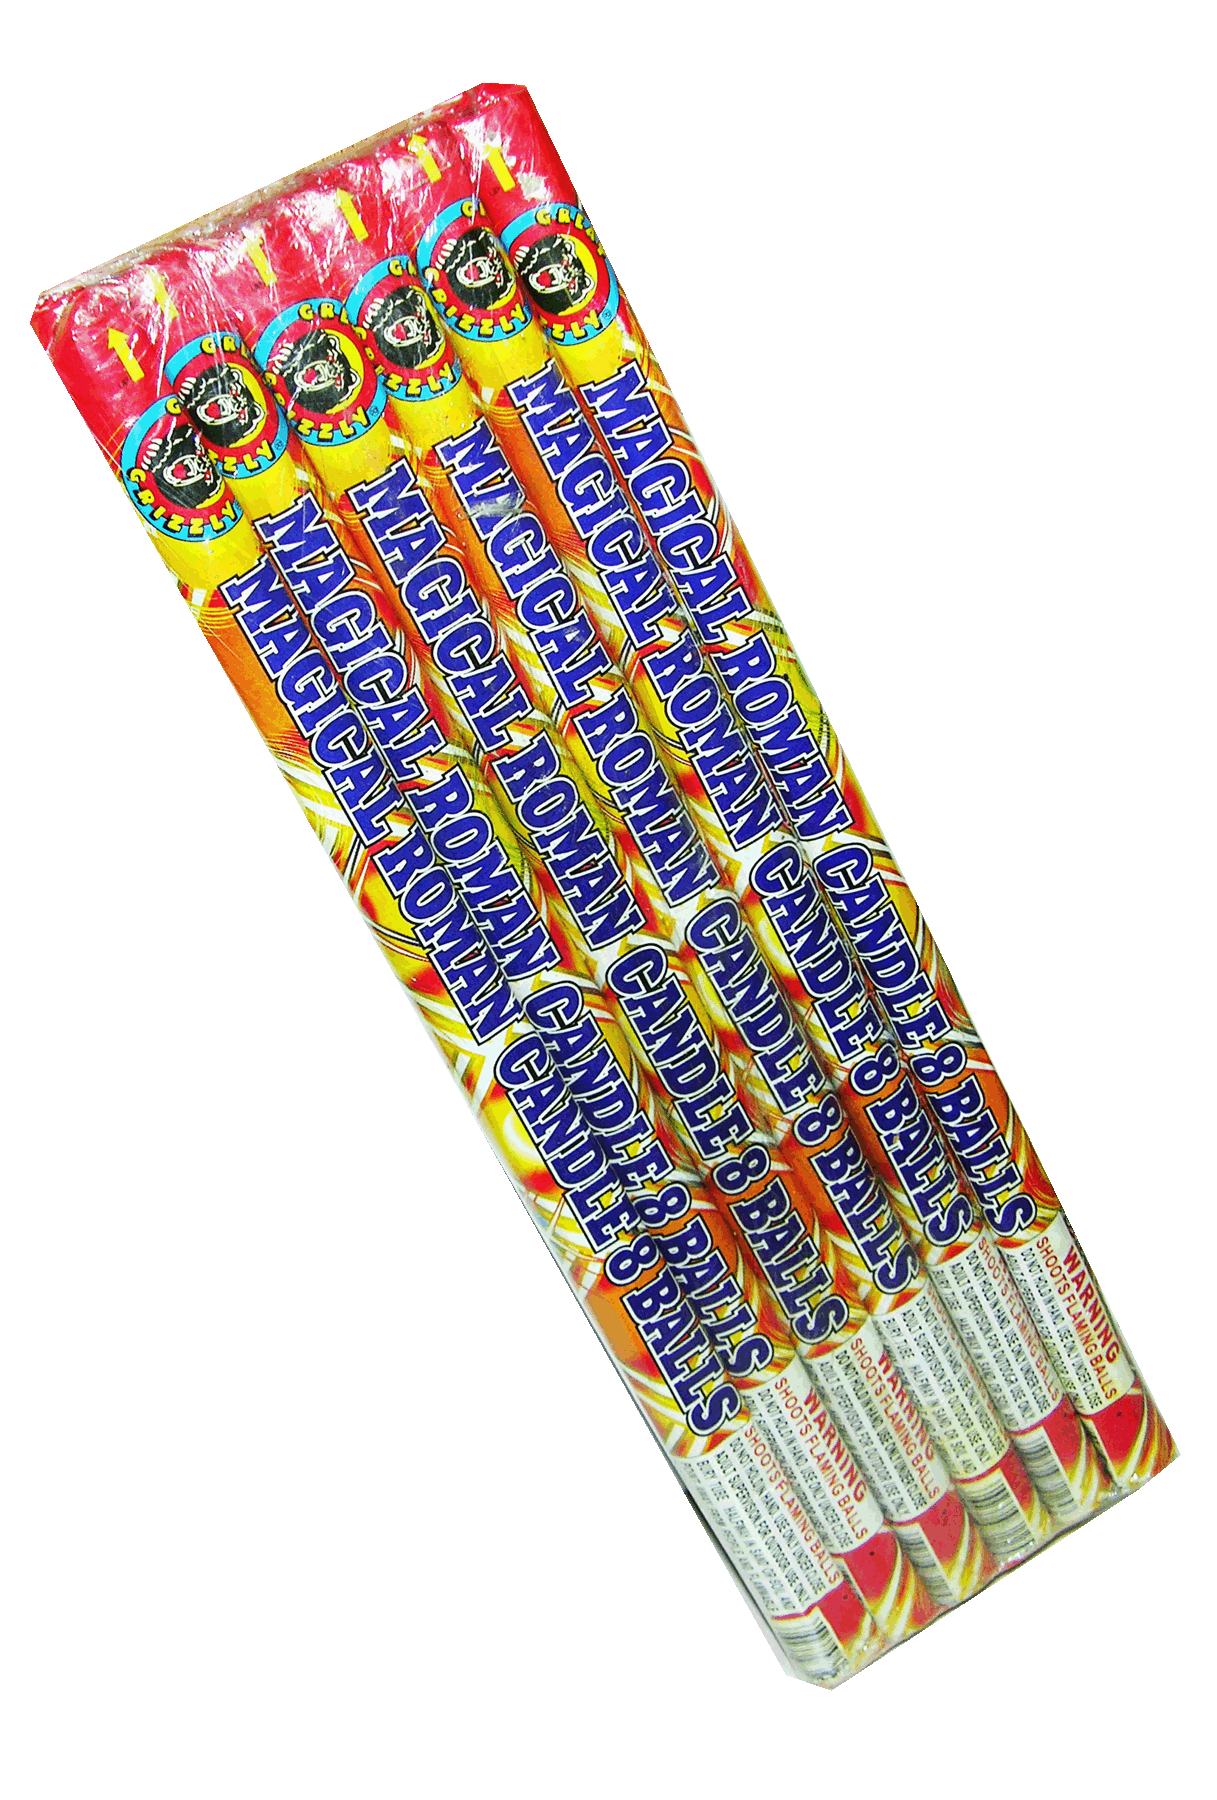 fireworks clipart roman candle